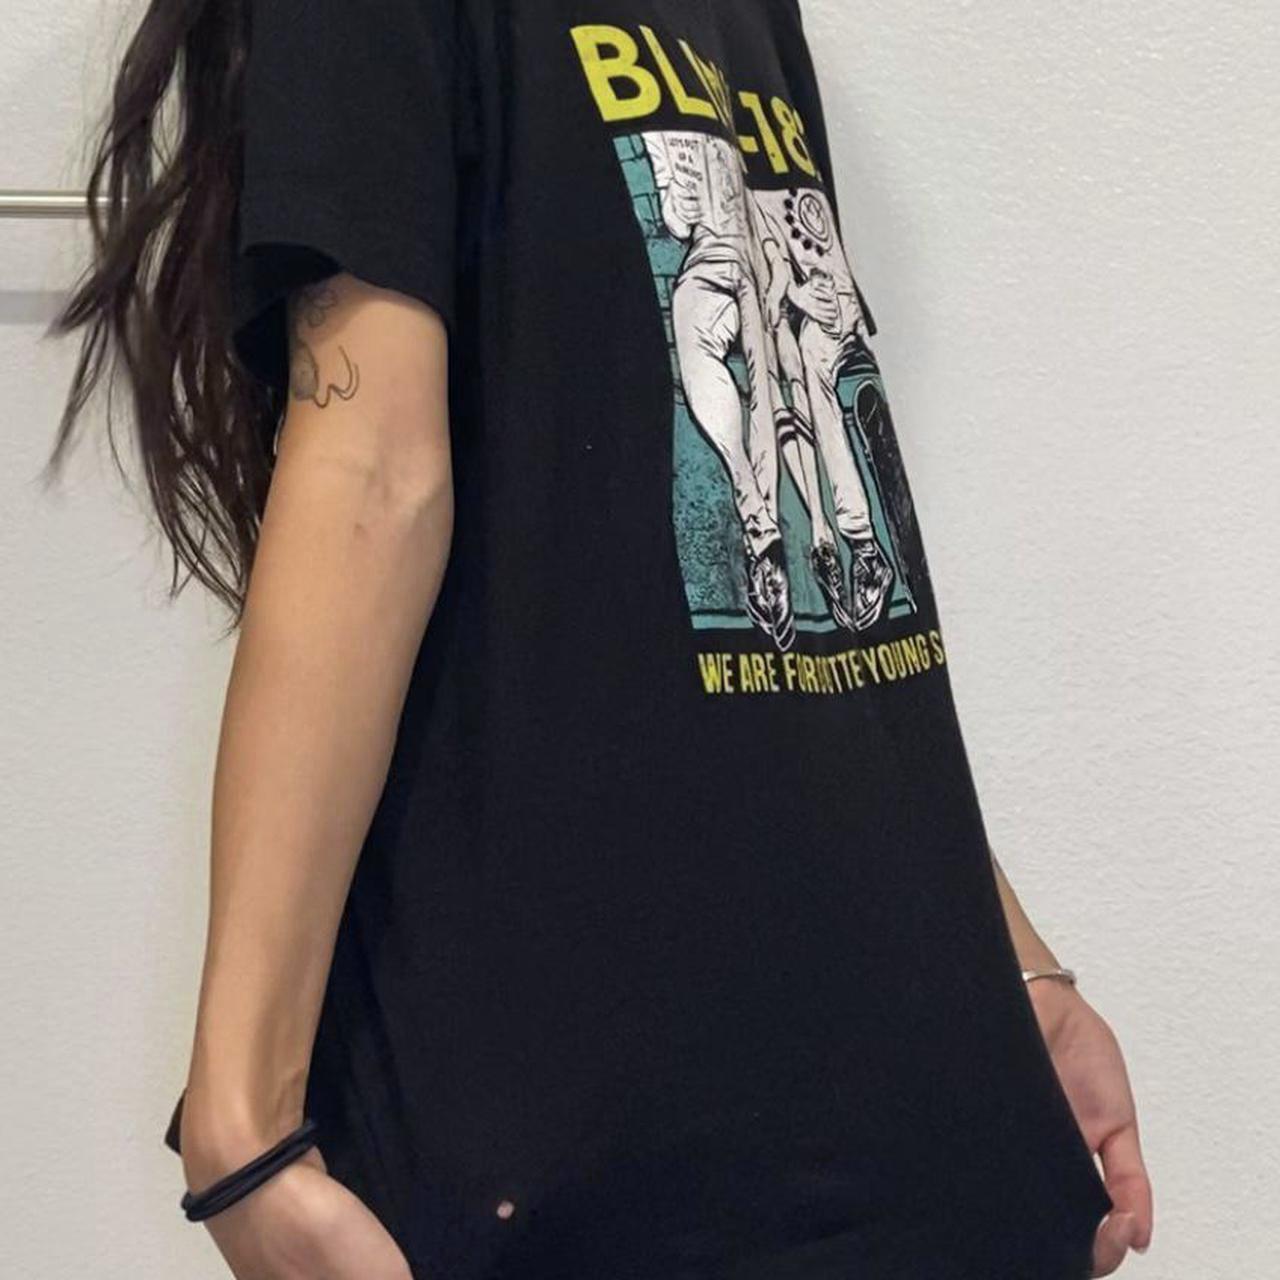 Product Image 4 - ☆ BLINK-182 BAND TEE ☆

♡